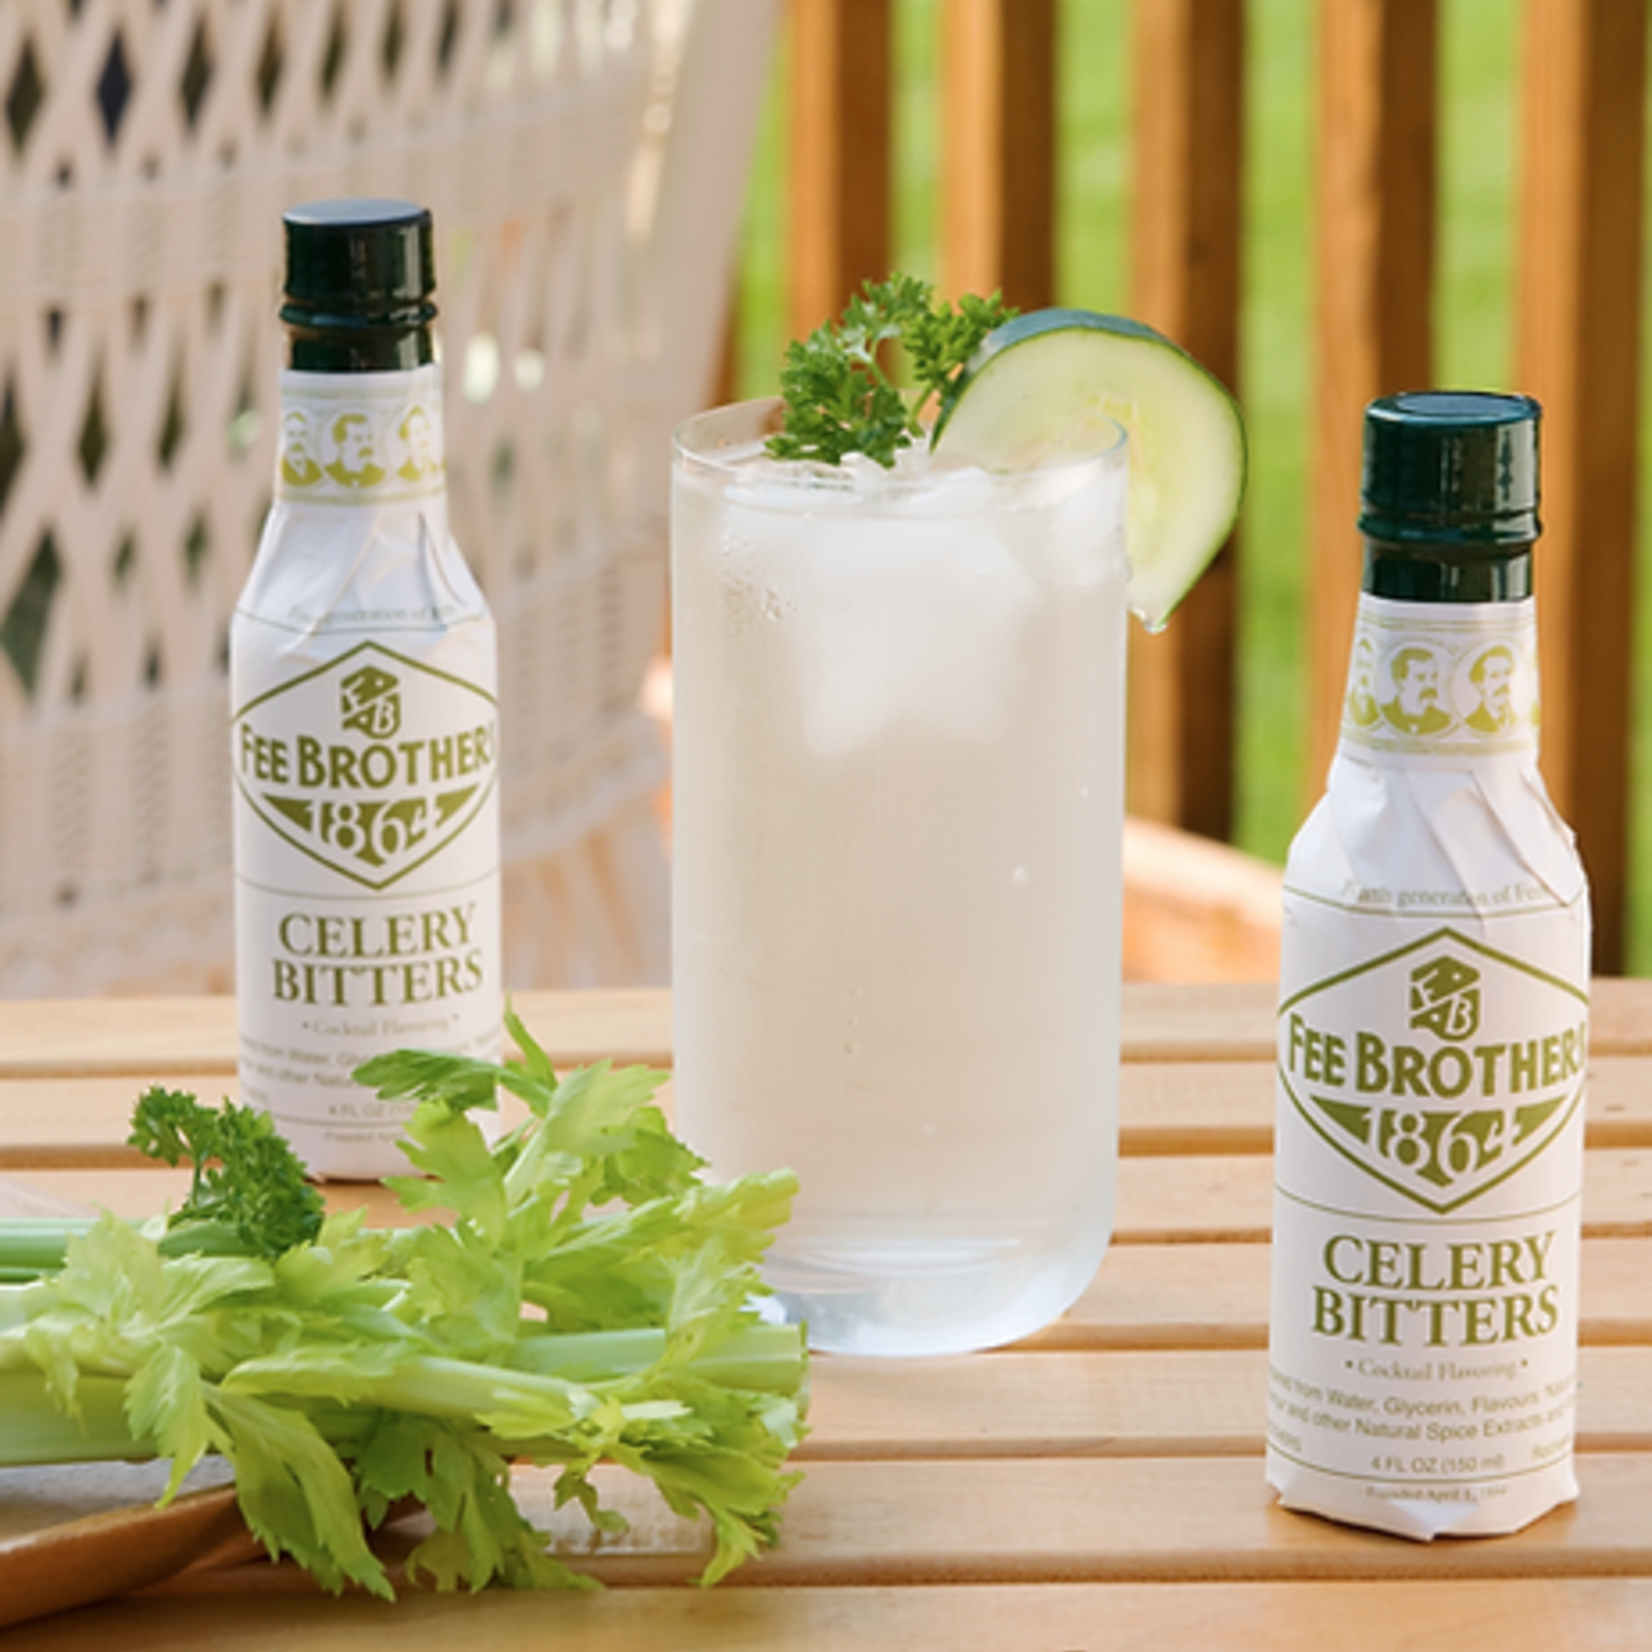 Fee Brothers Fee Brothers Bitters Celery